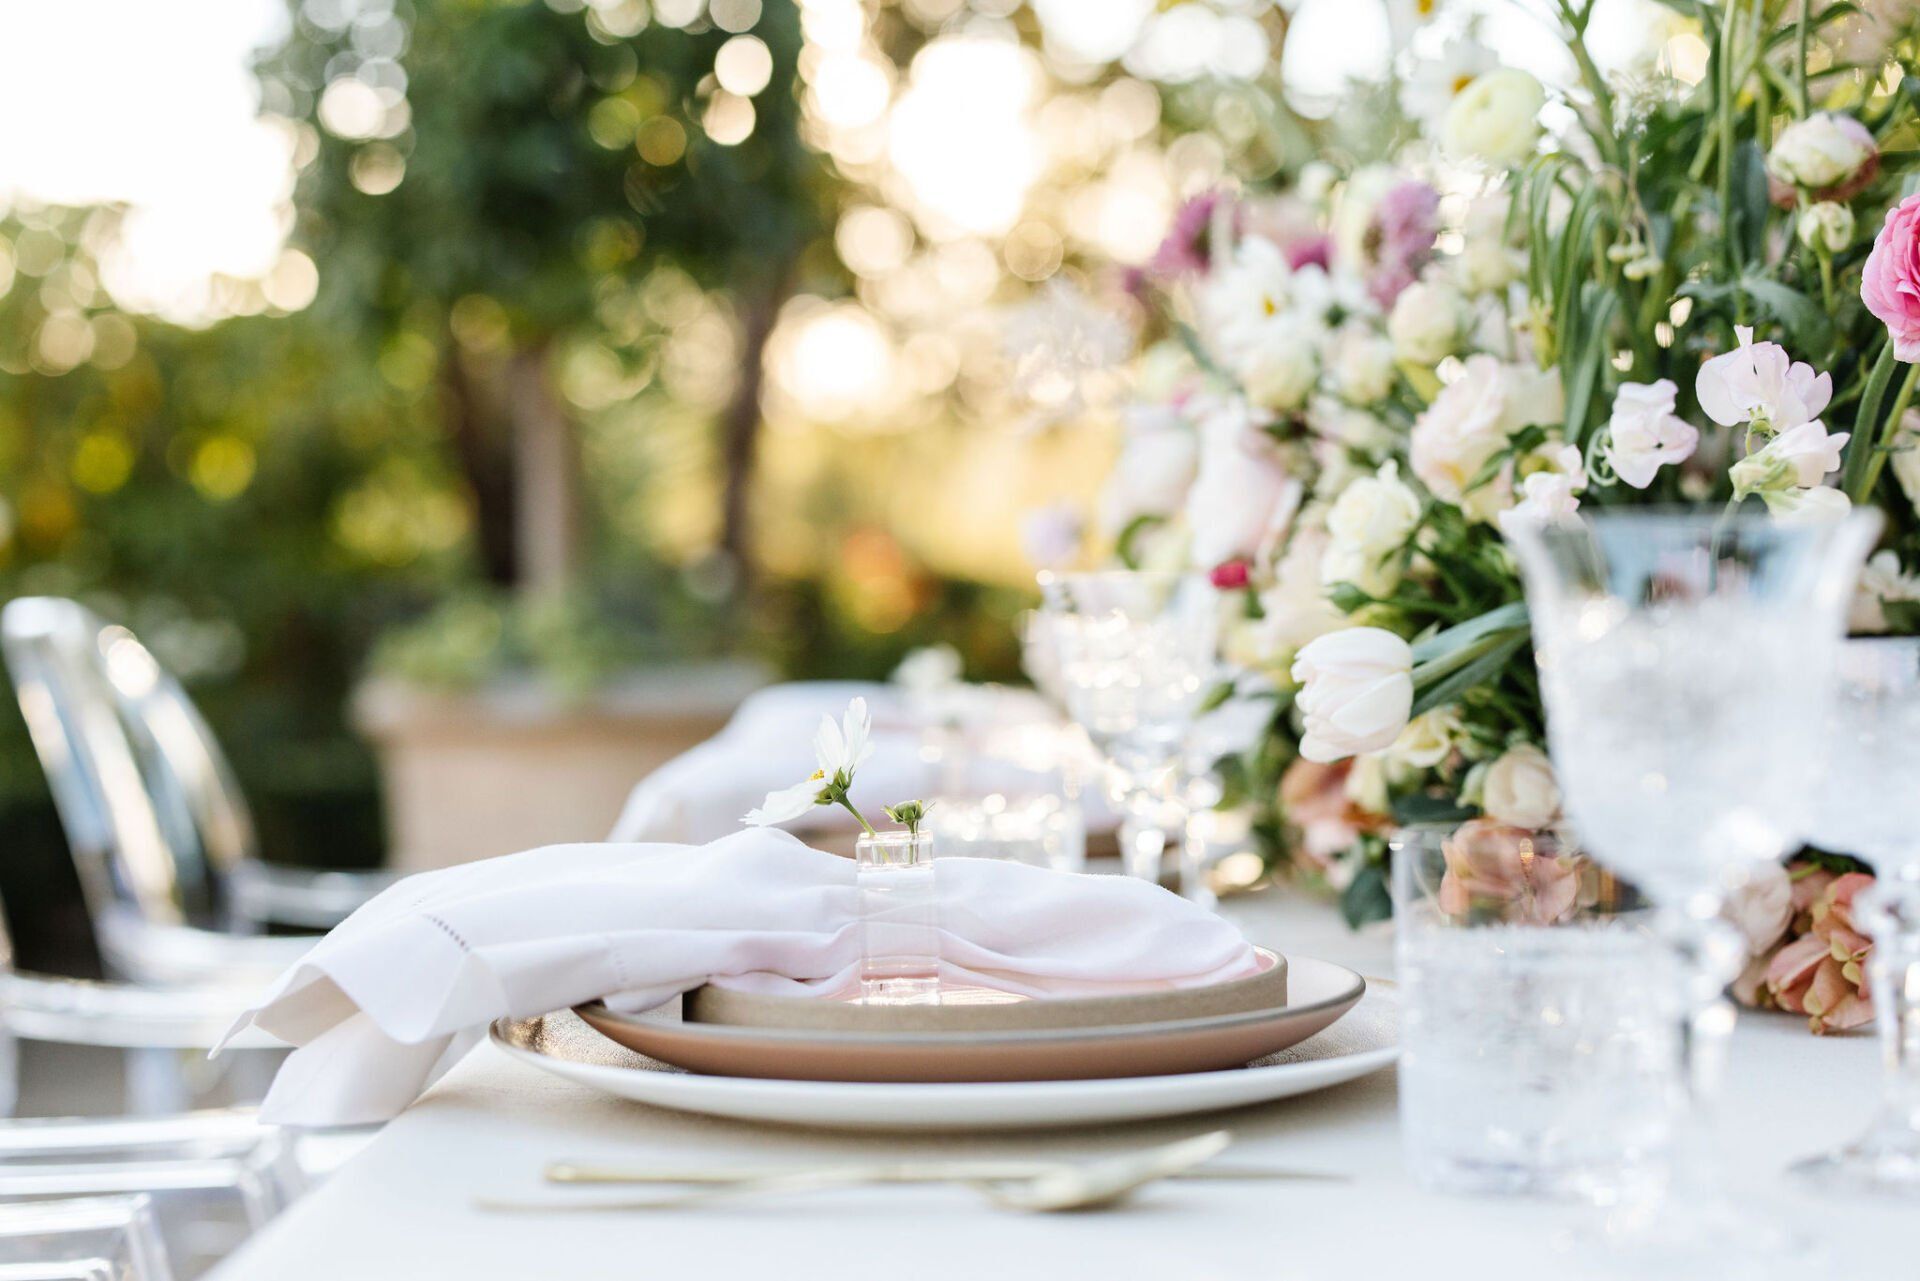 A table set for a wedding reception with plates , silverware , glasses and flowers.